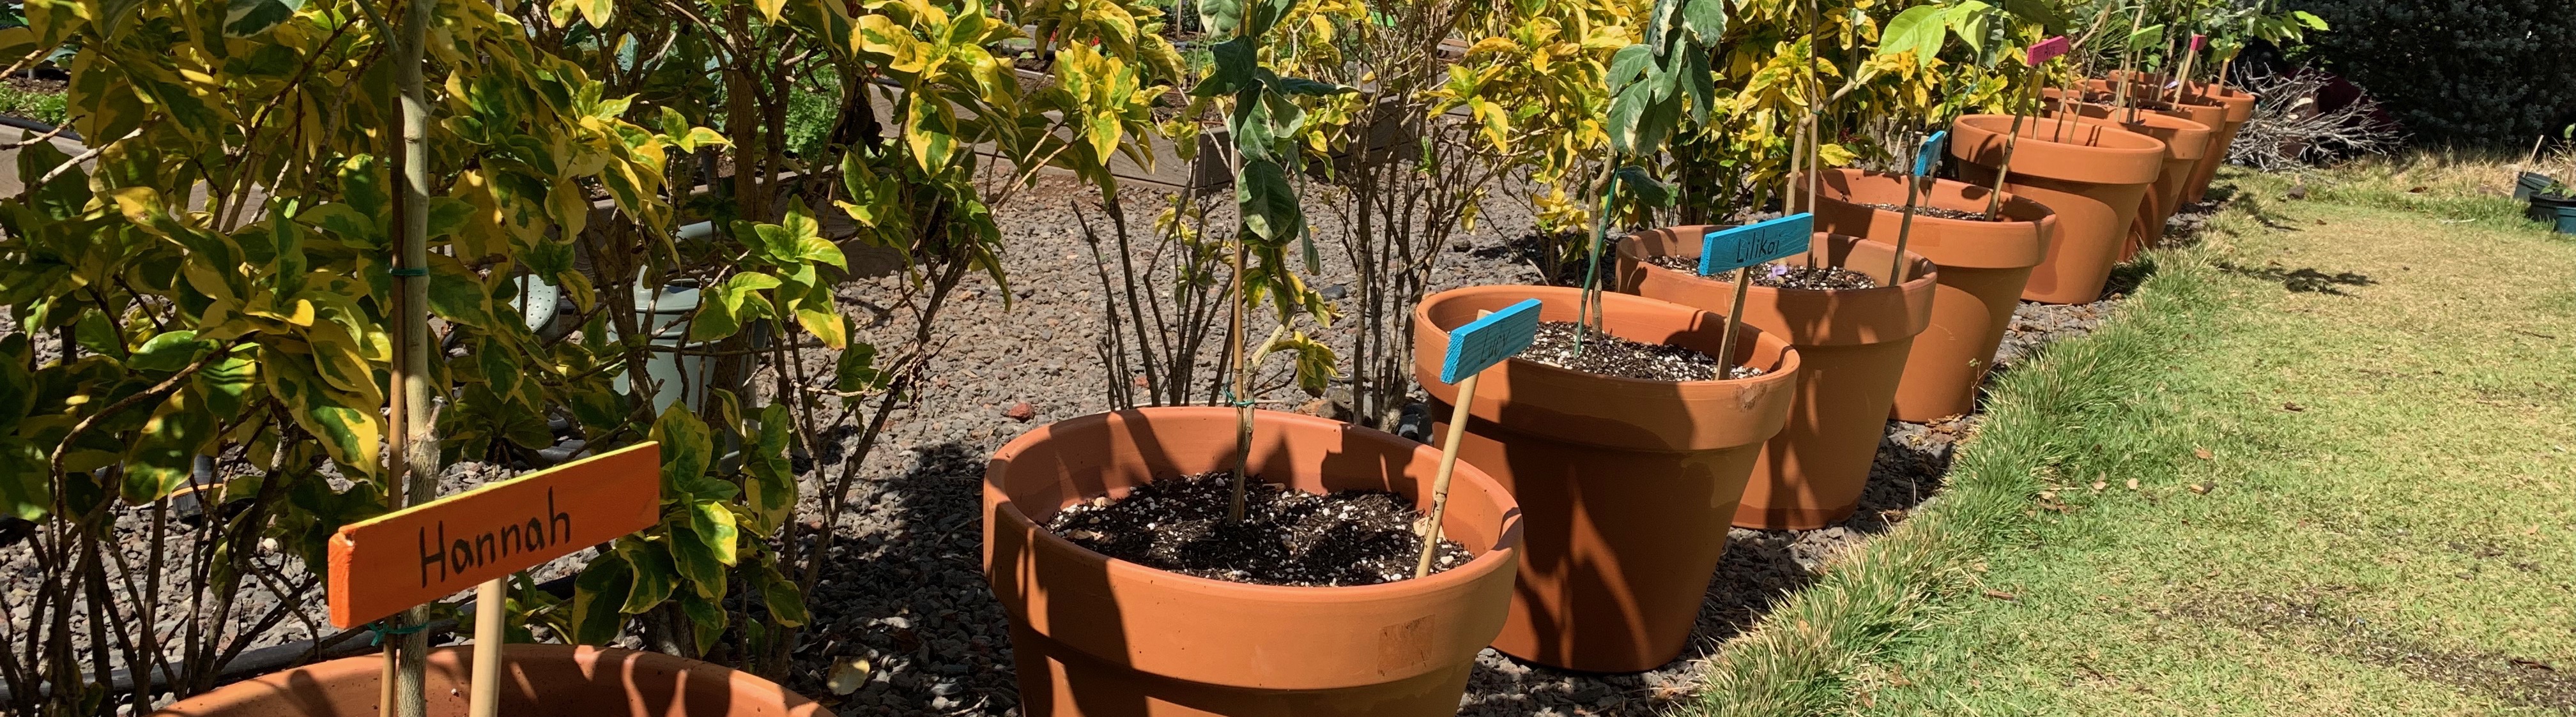 A row of potted lemon trees with name signs